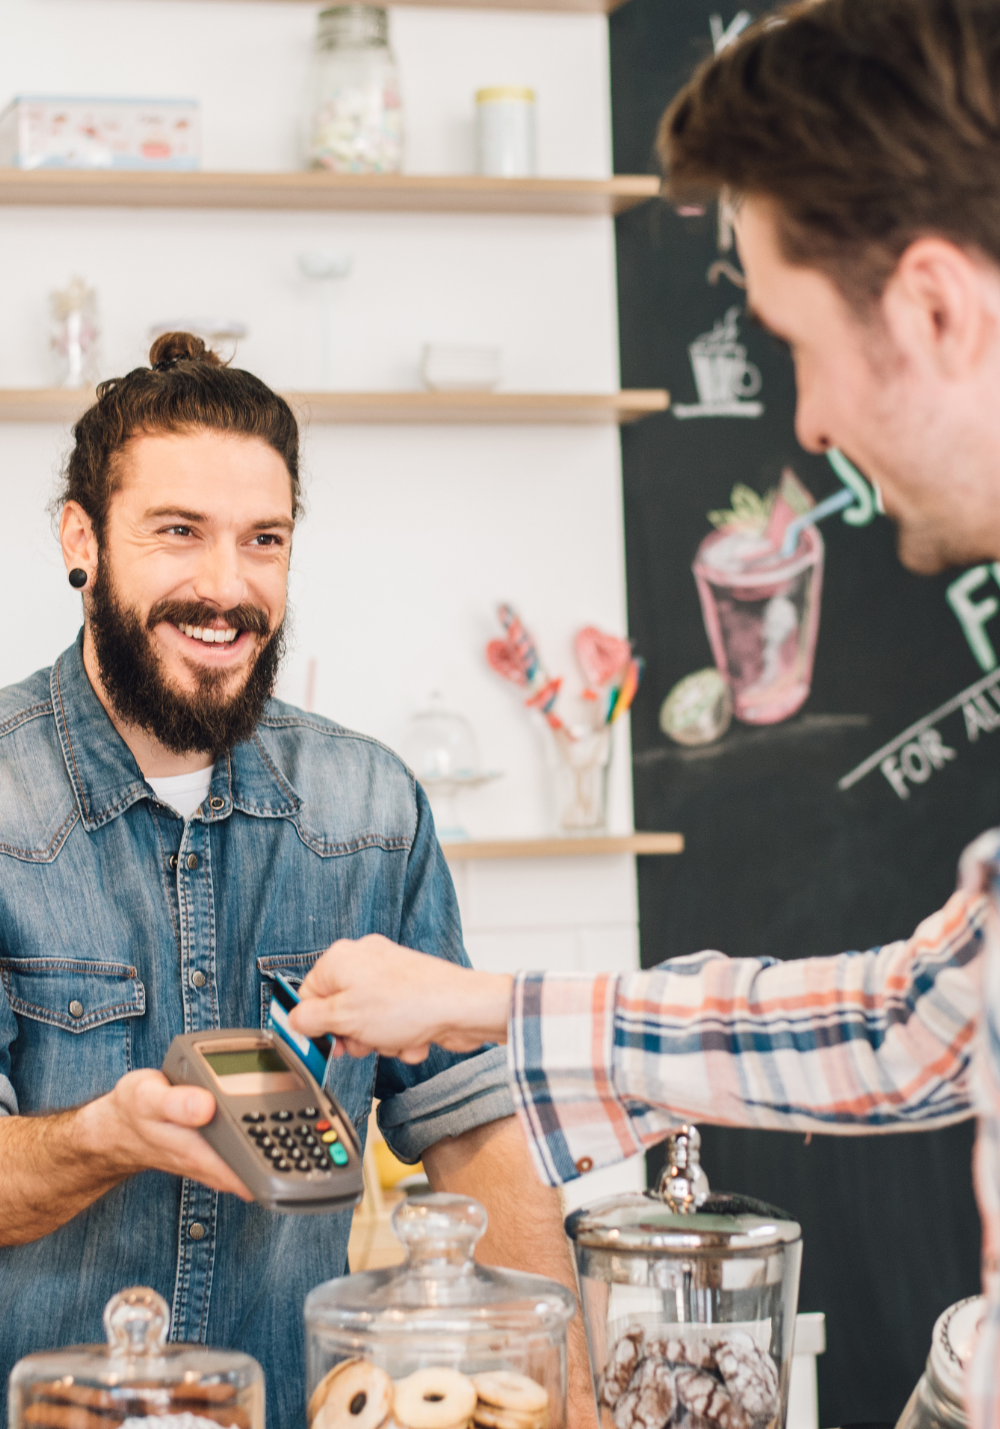 business owner accepting a credit card payment from a customer in person